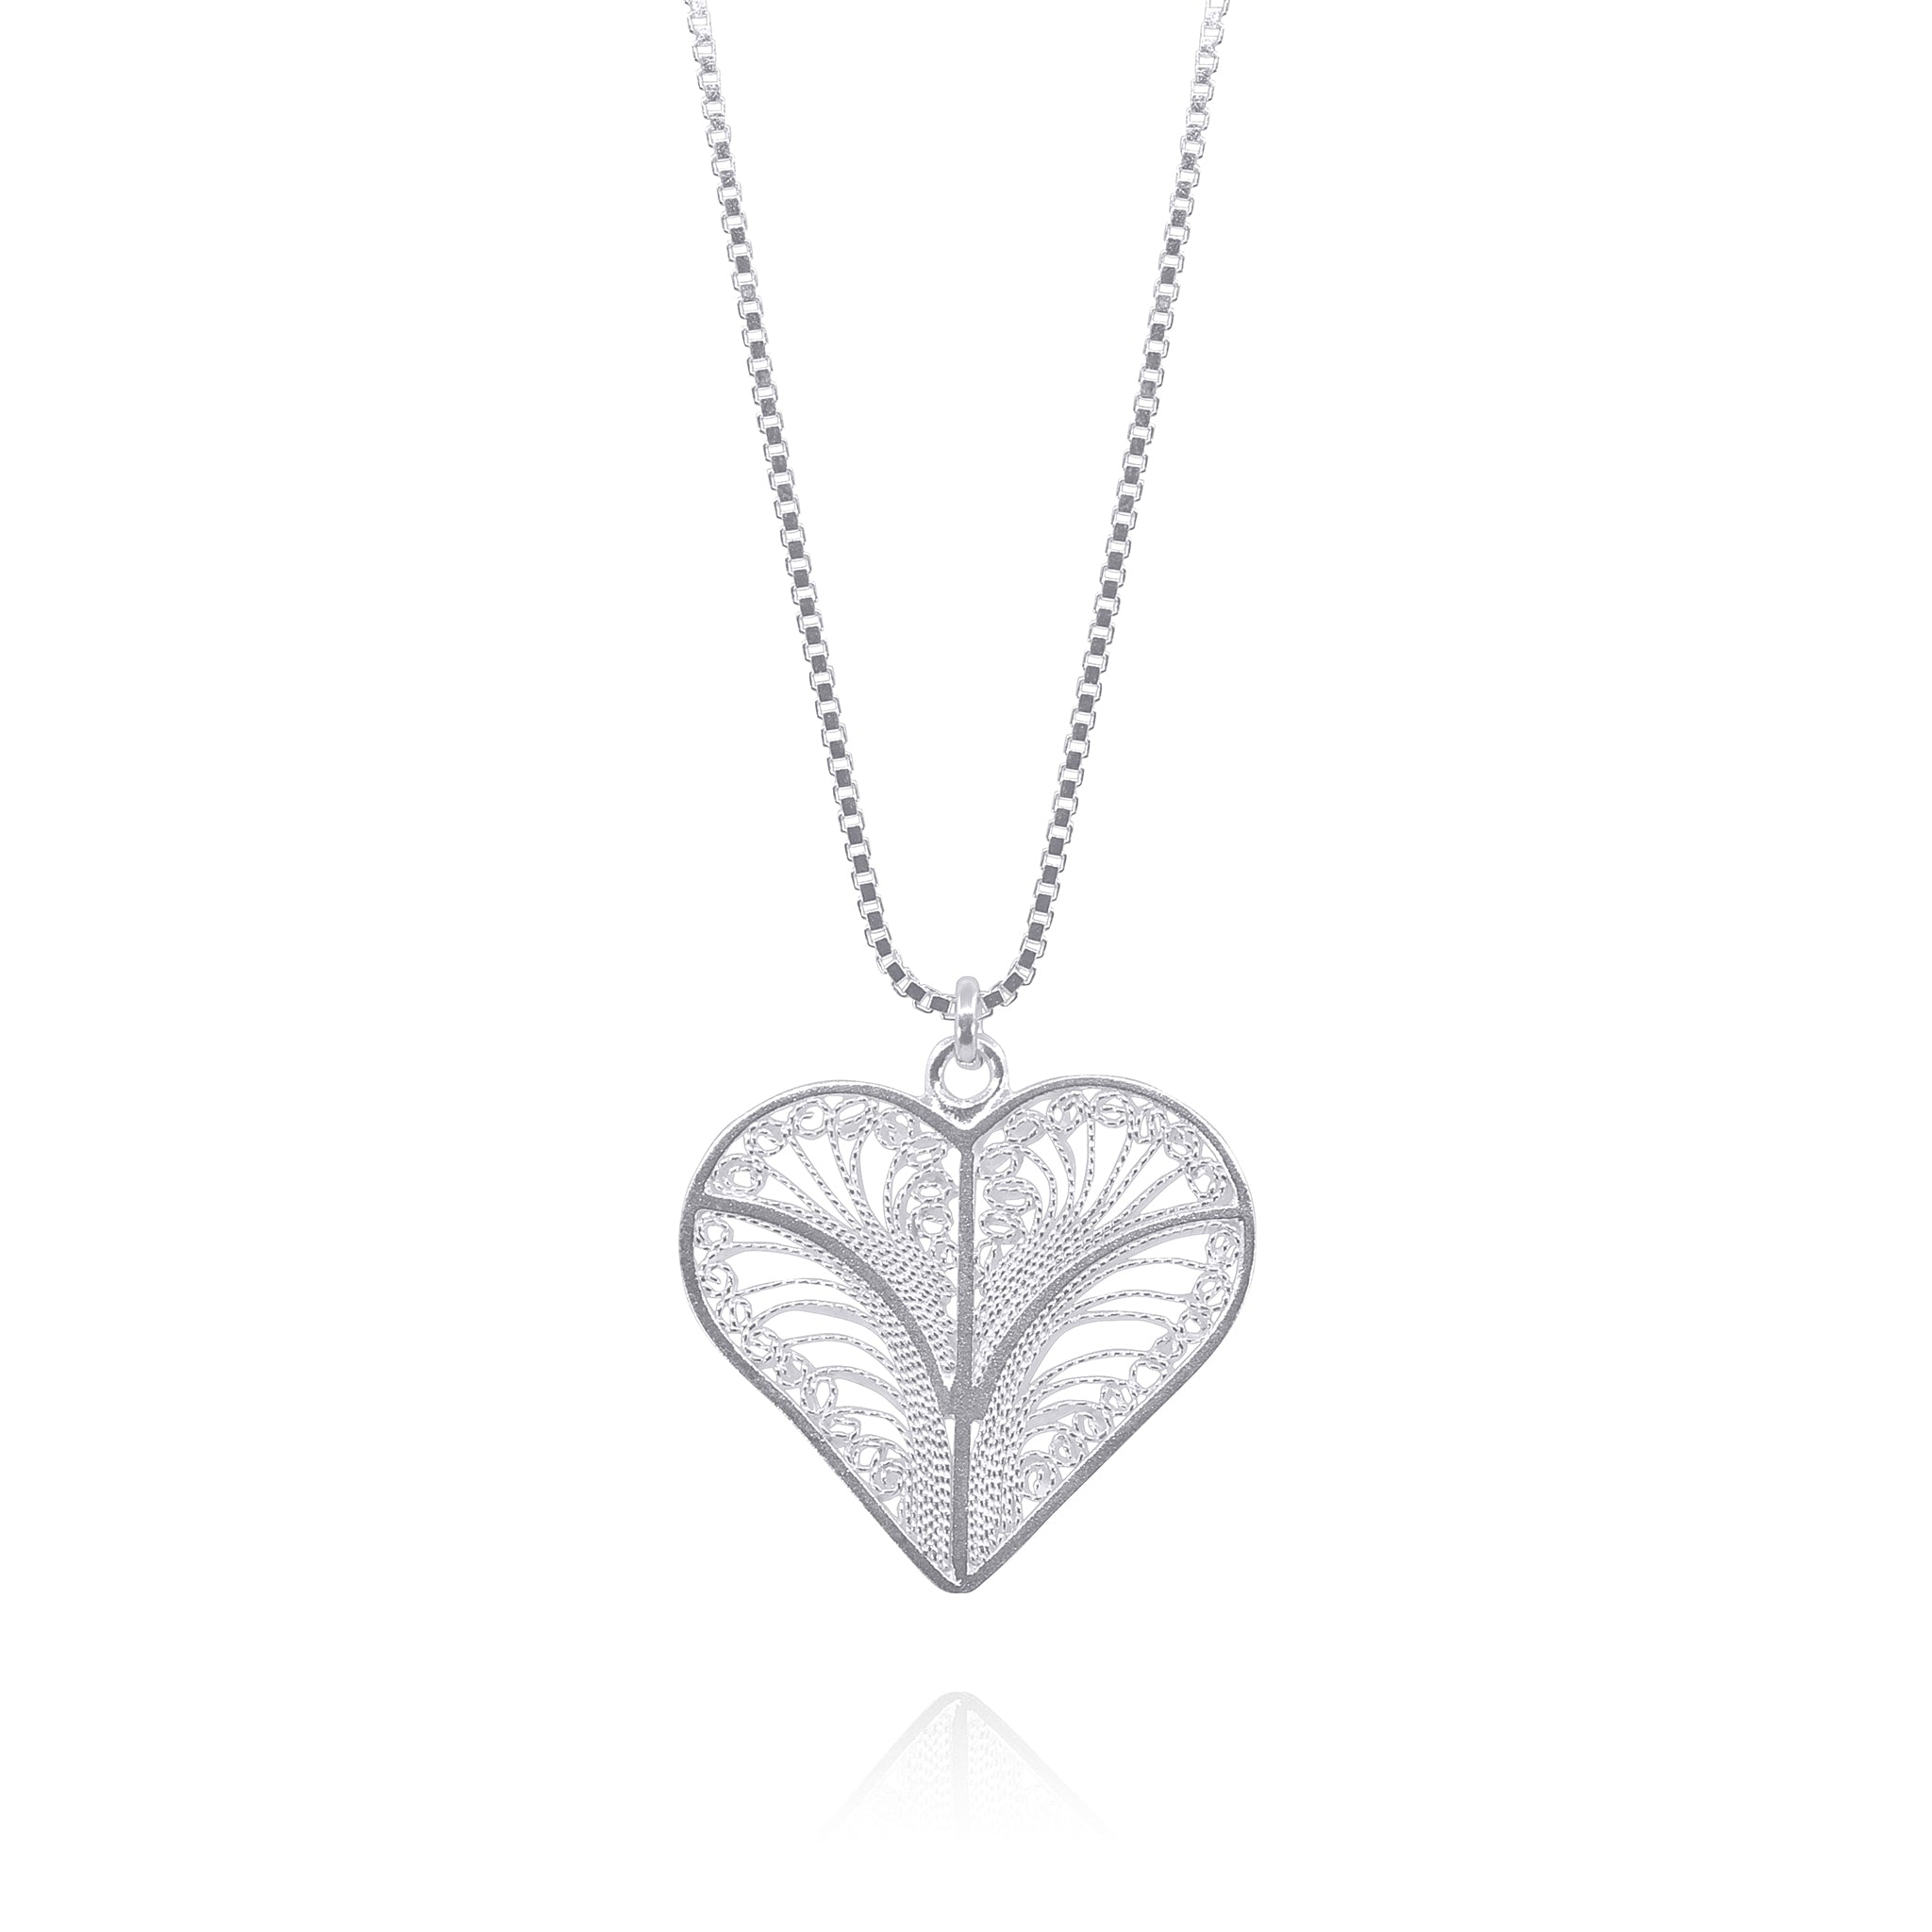 KYLIE SILVER HEARTS SMALL PENDANT NECKLACE FILIGREE